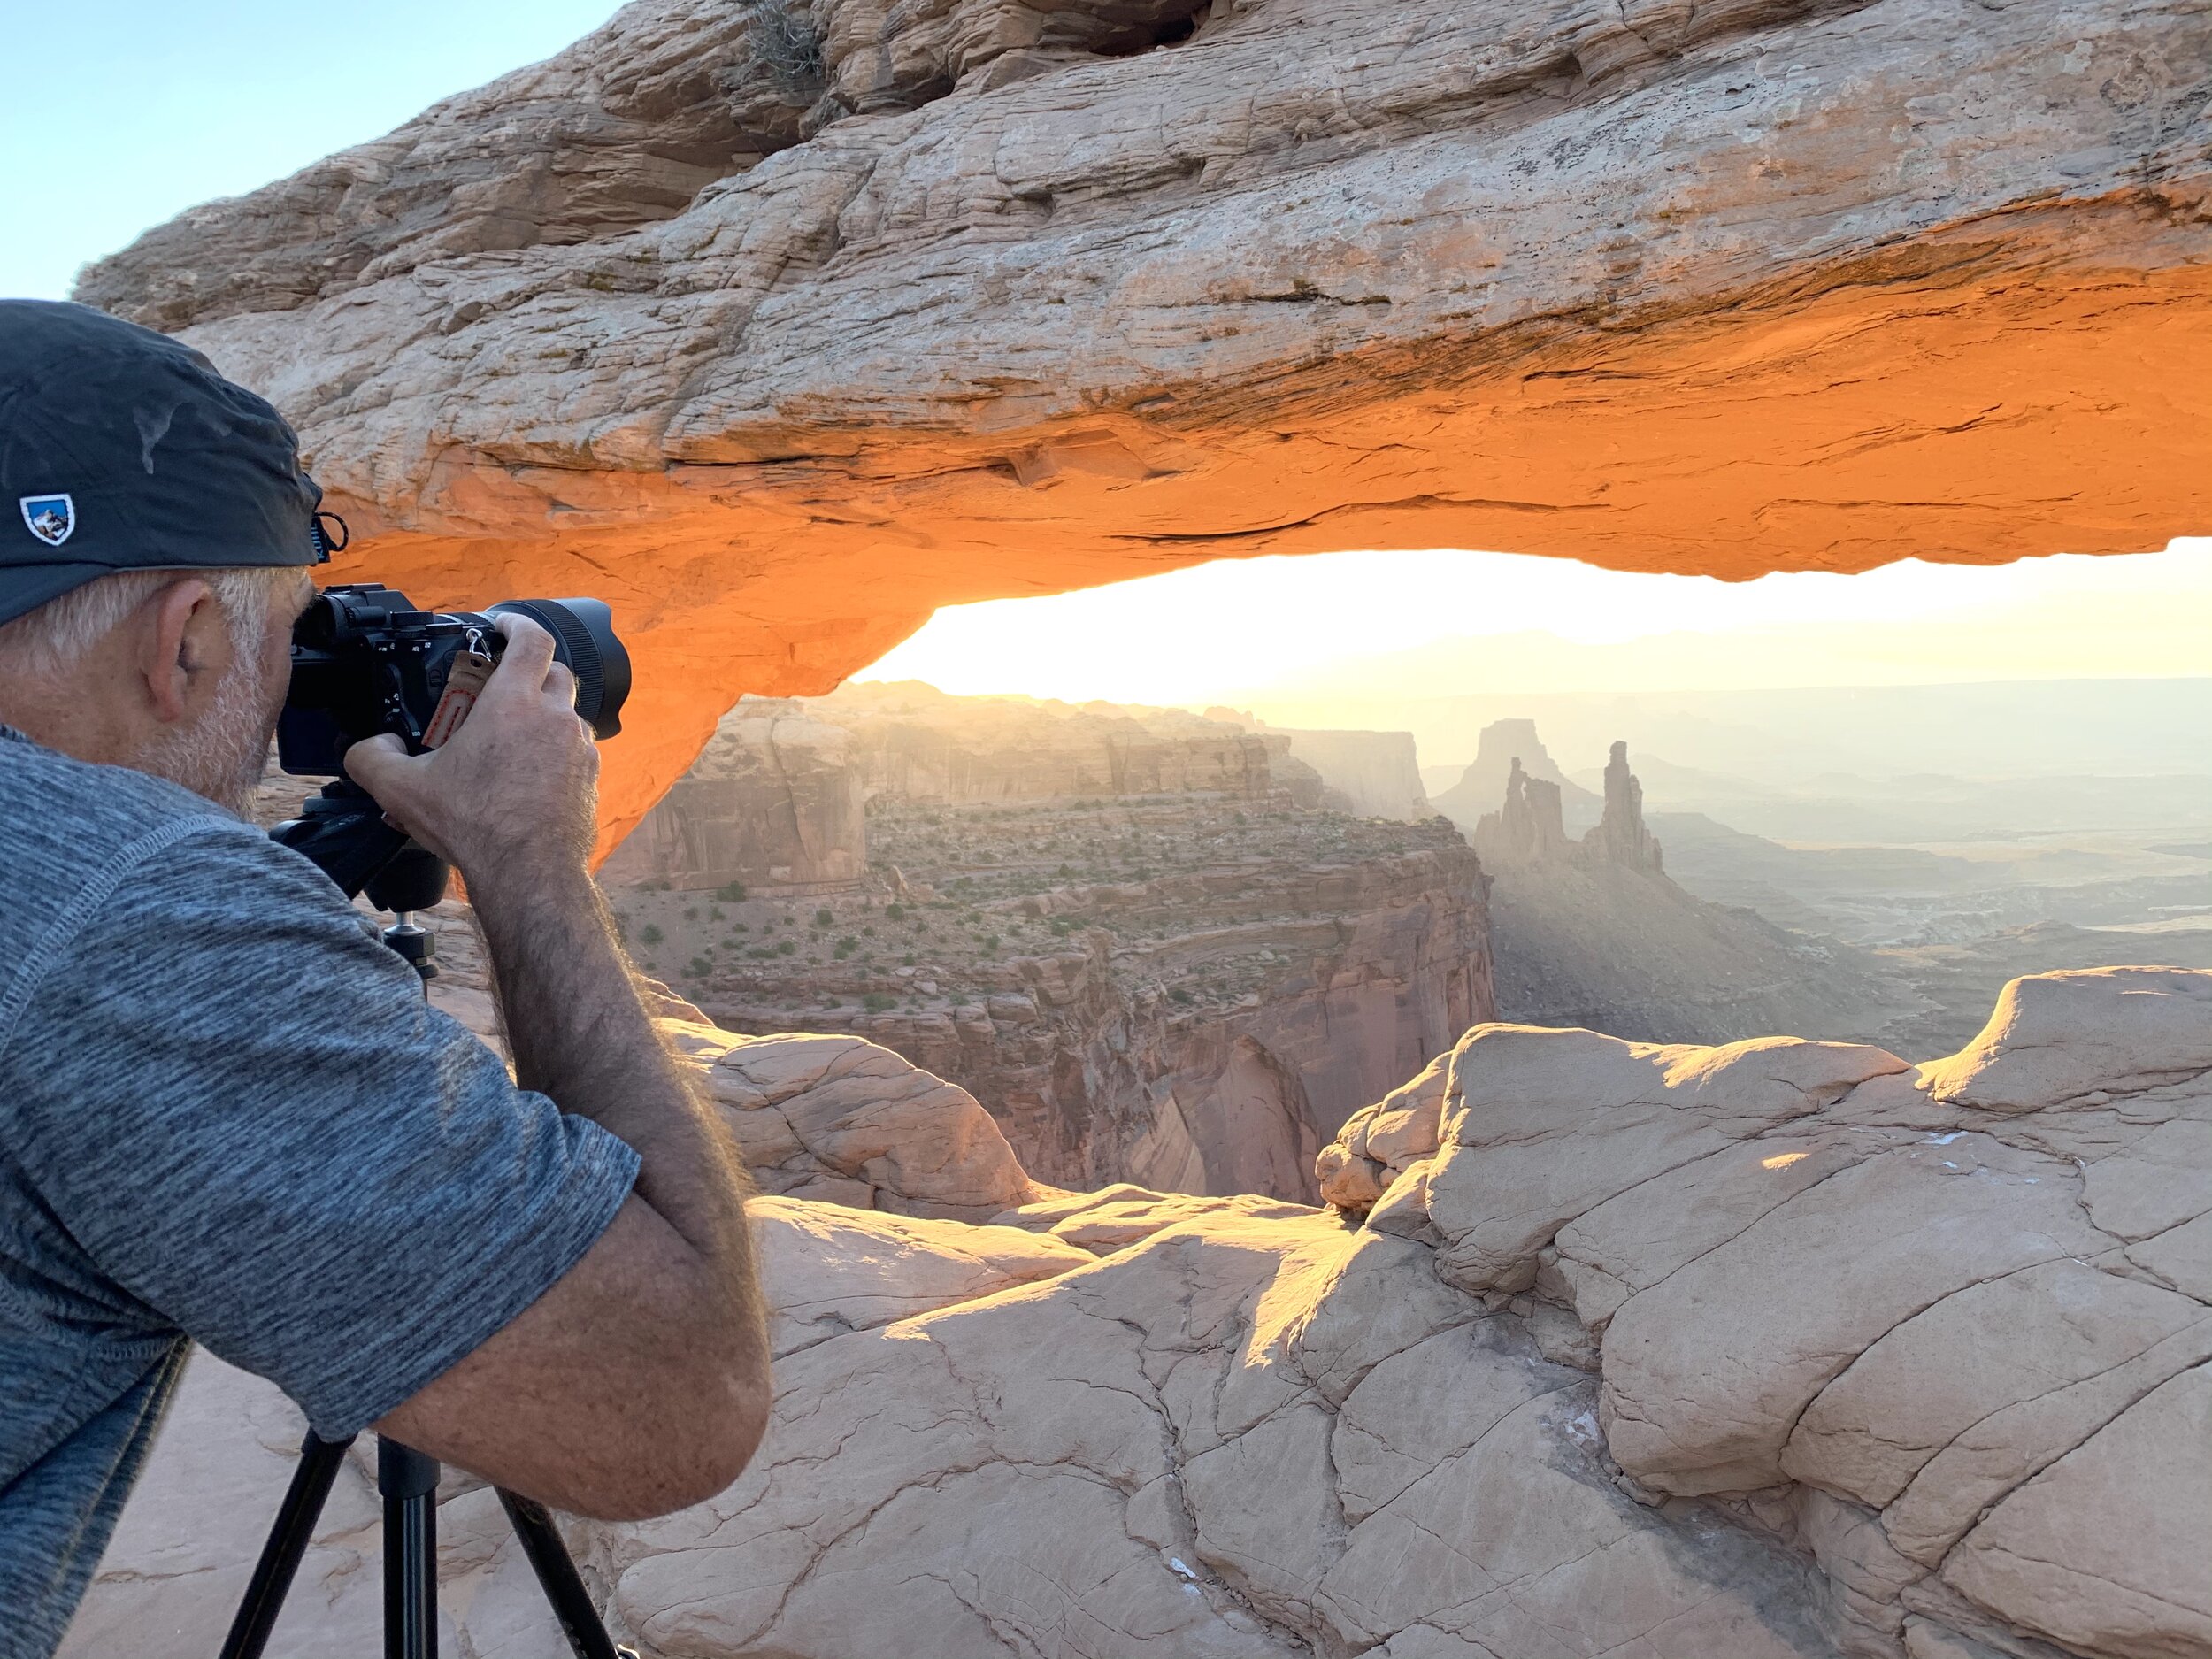  The cover photo for this blog is one of his photos from this morning at Canyonlands.  